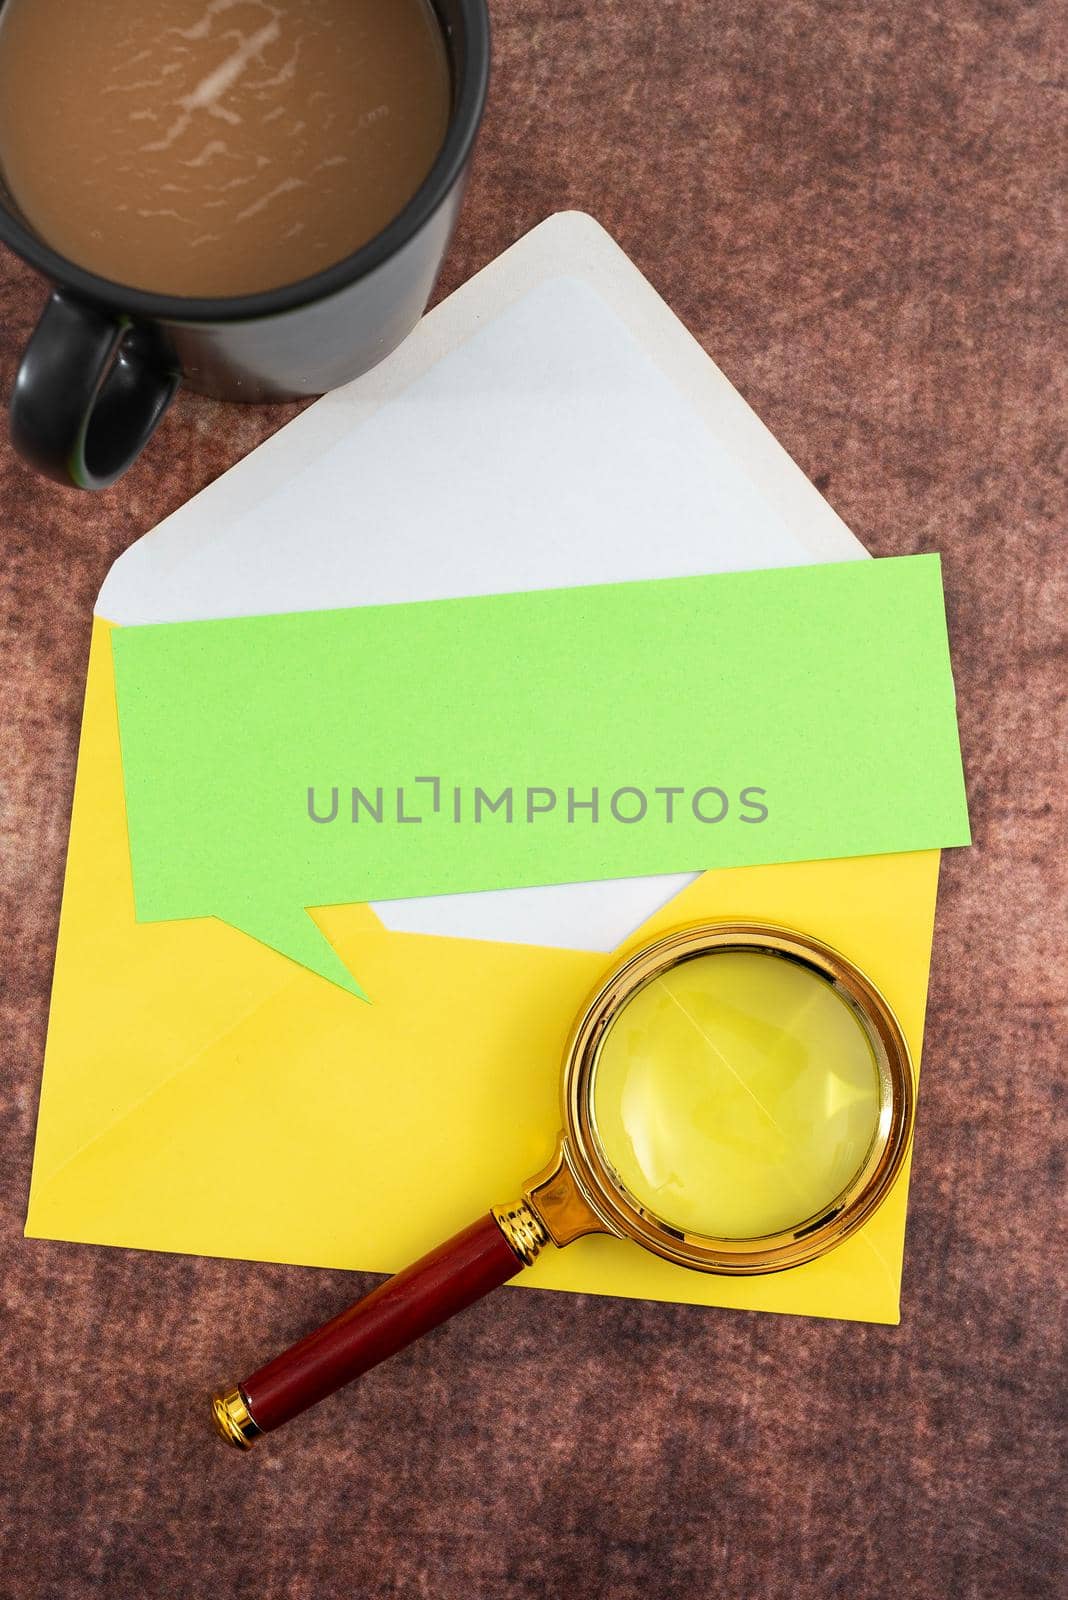 Blank Paper With Speech Bubble Shape, Envelope, Coffee Mug And Magnifying Glass Placed On Table. It Is Representing Important Marketing Strategies For Business Goals. by nialowwa